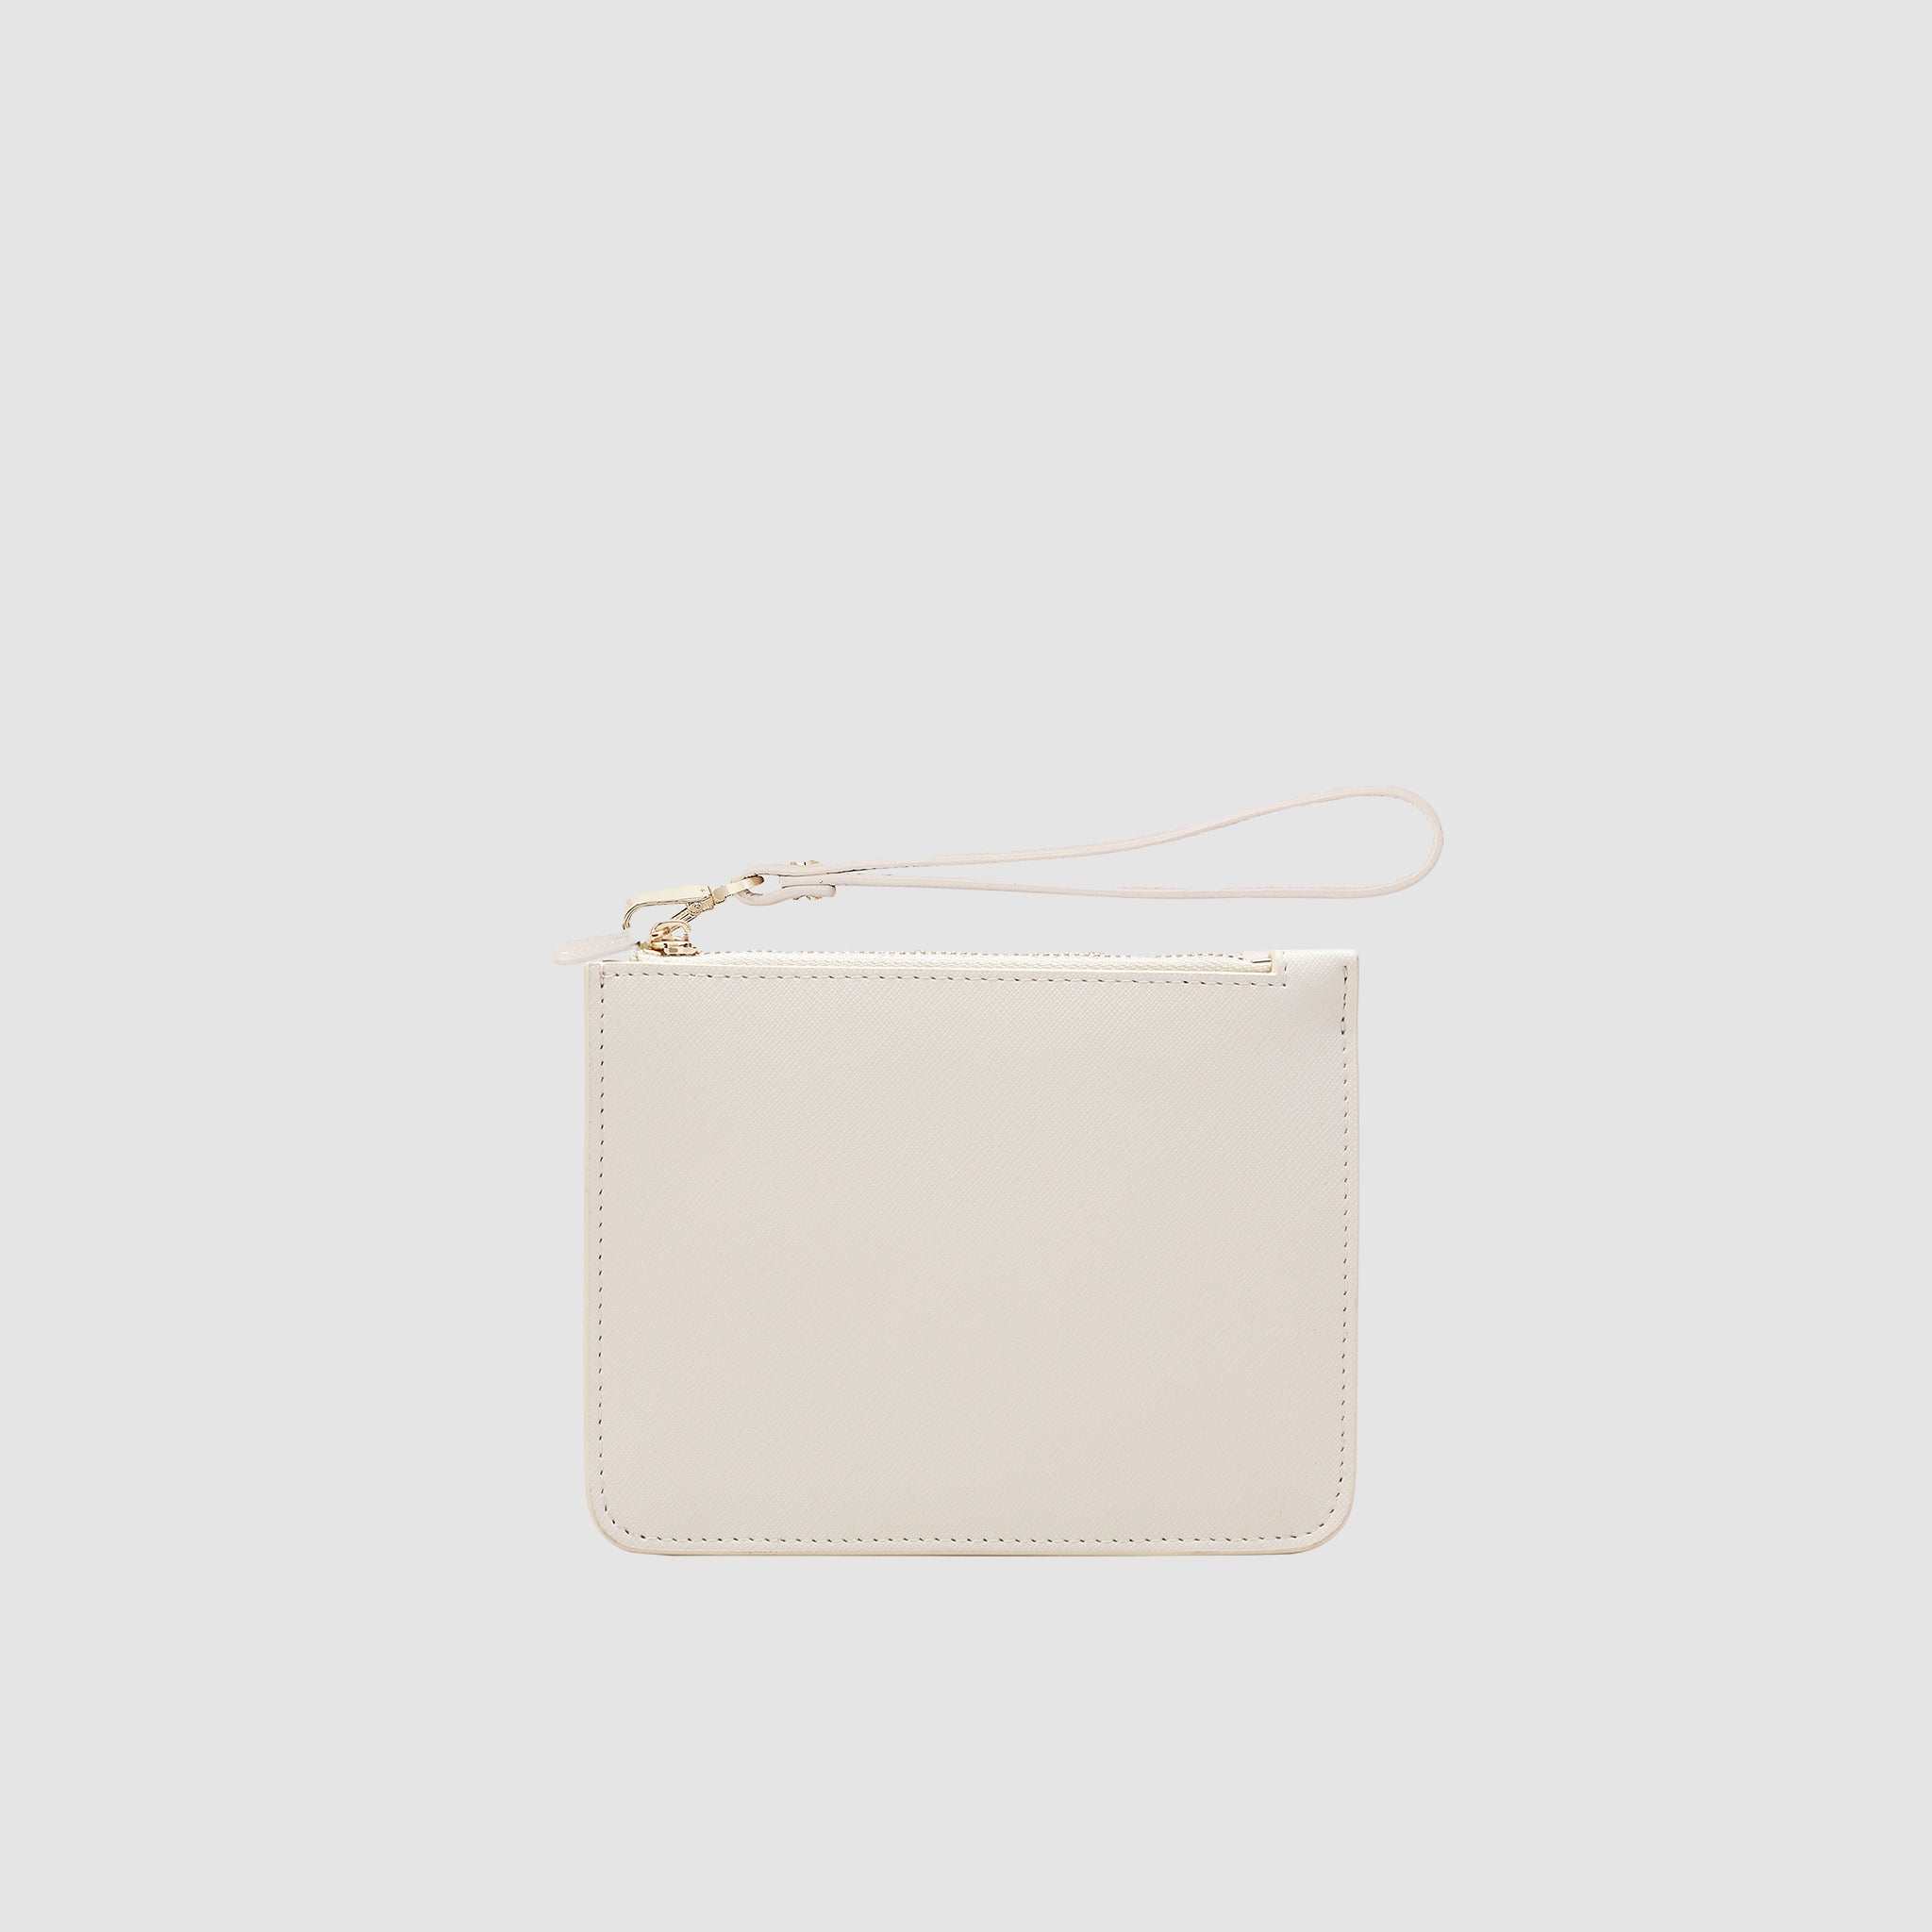 Mini Structured Pouch with Wrist Strap